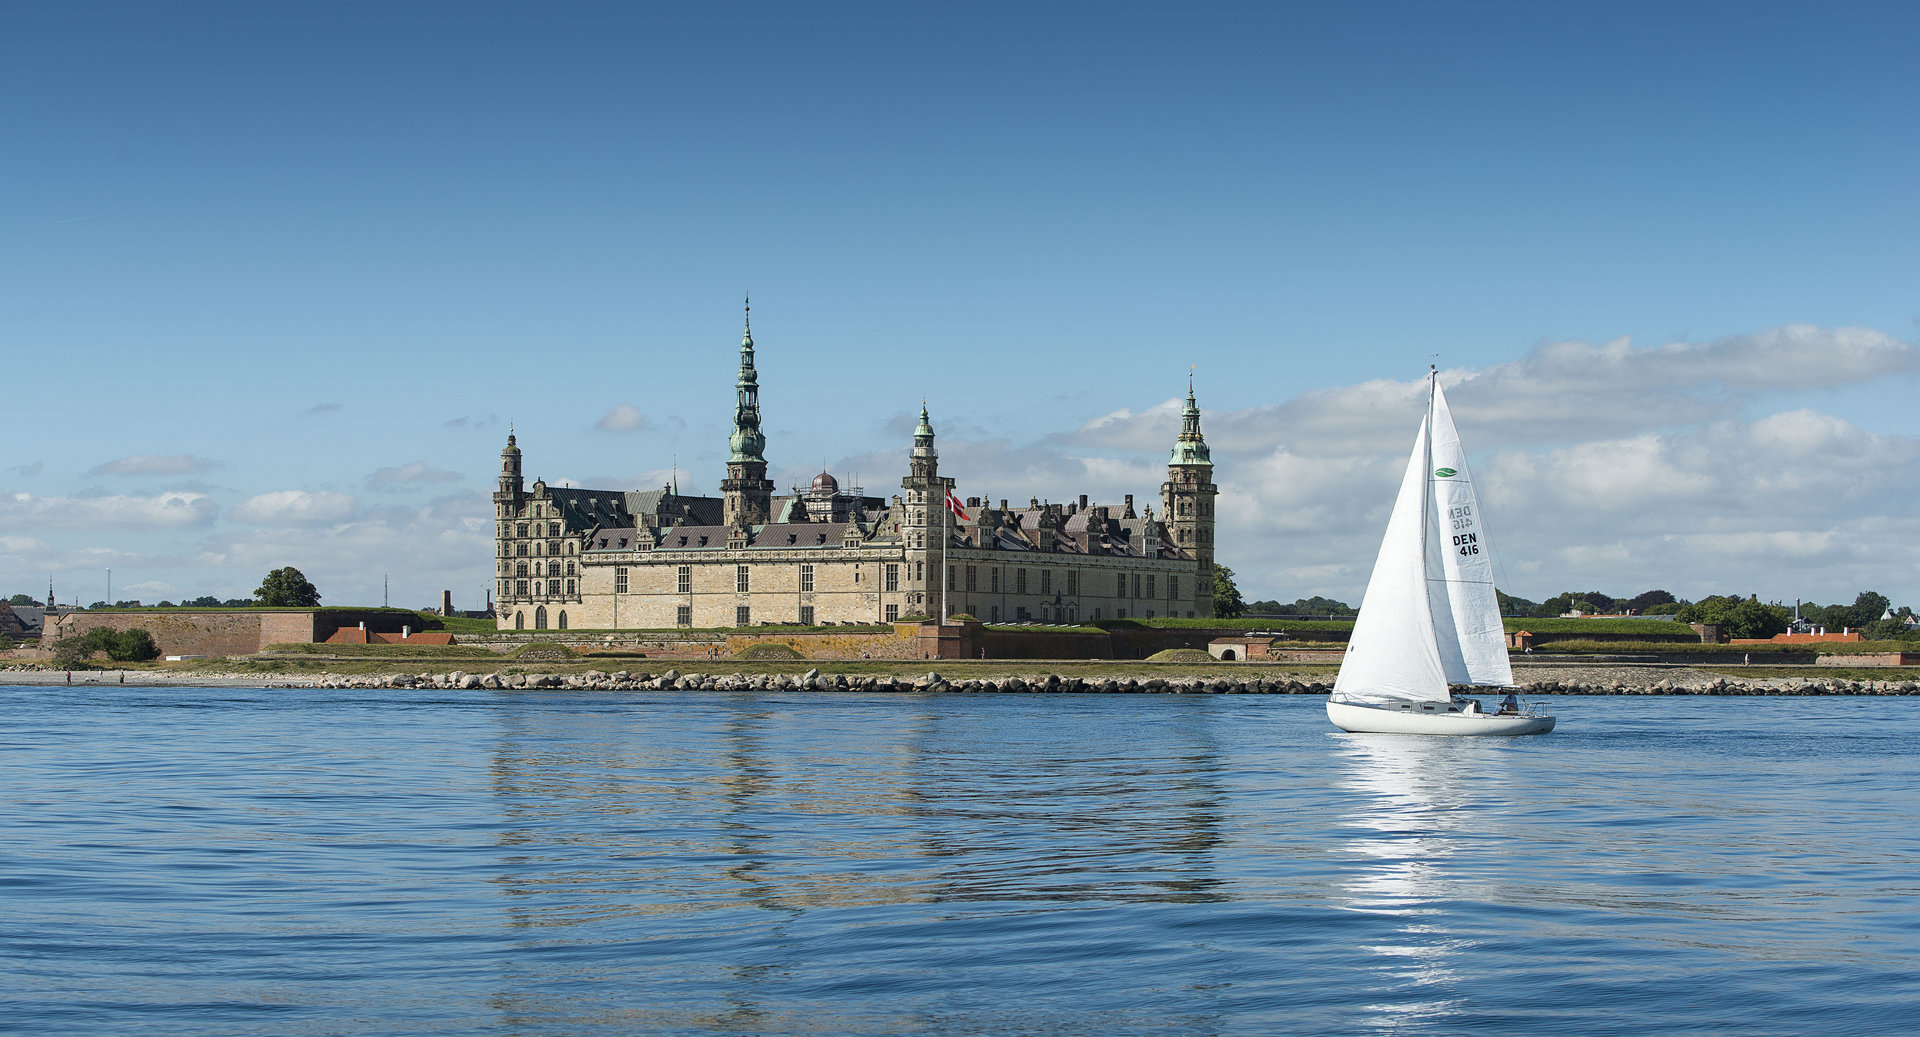 Photo by the sea of Kronborg Castle